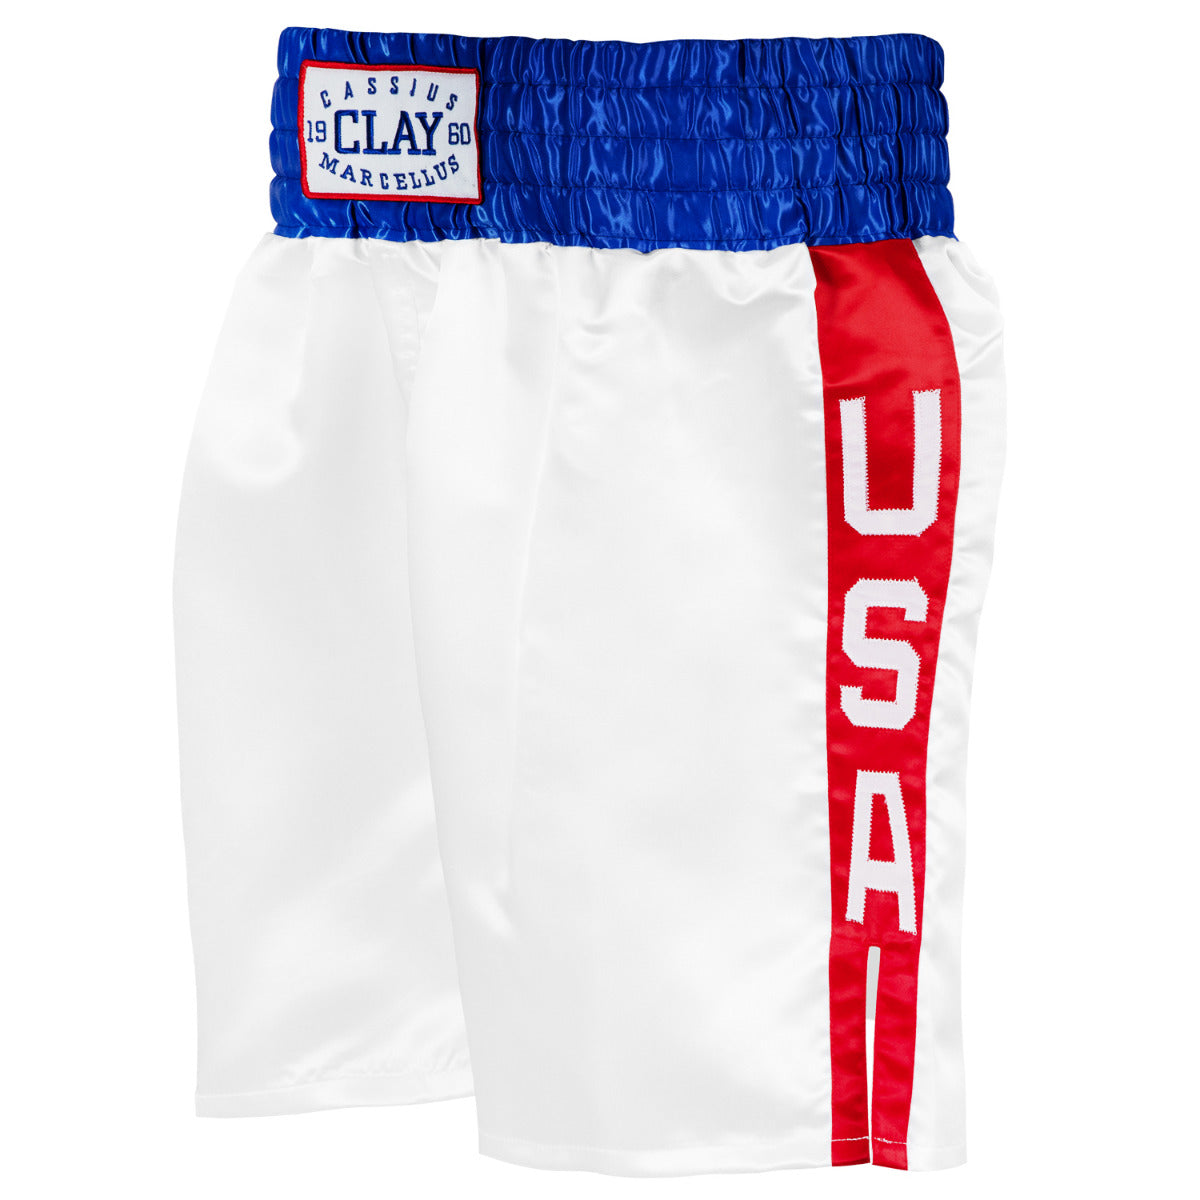 Cassius Clay In The 60’s Boxing Trunks